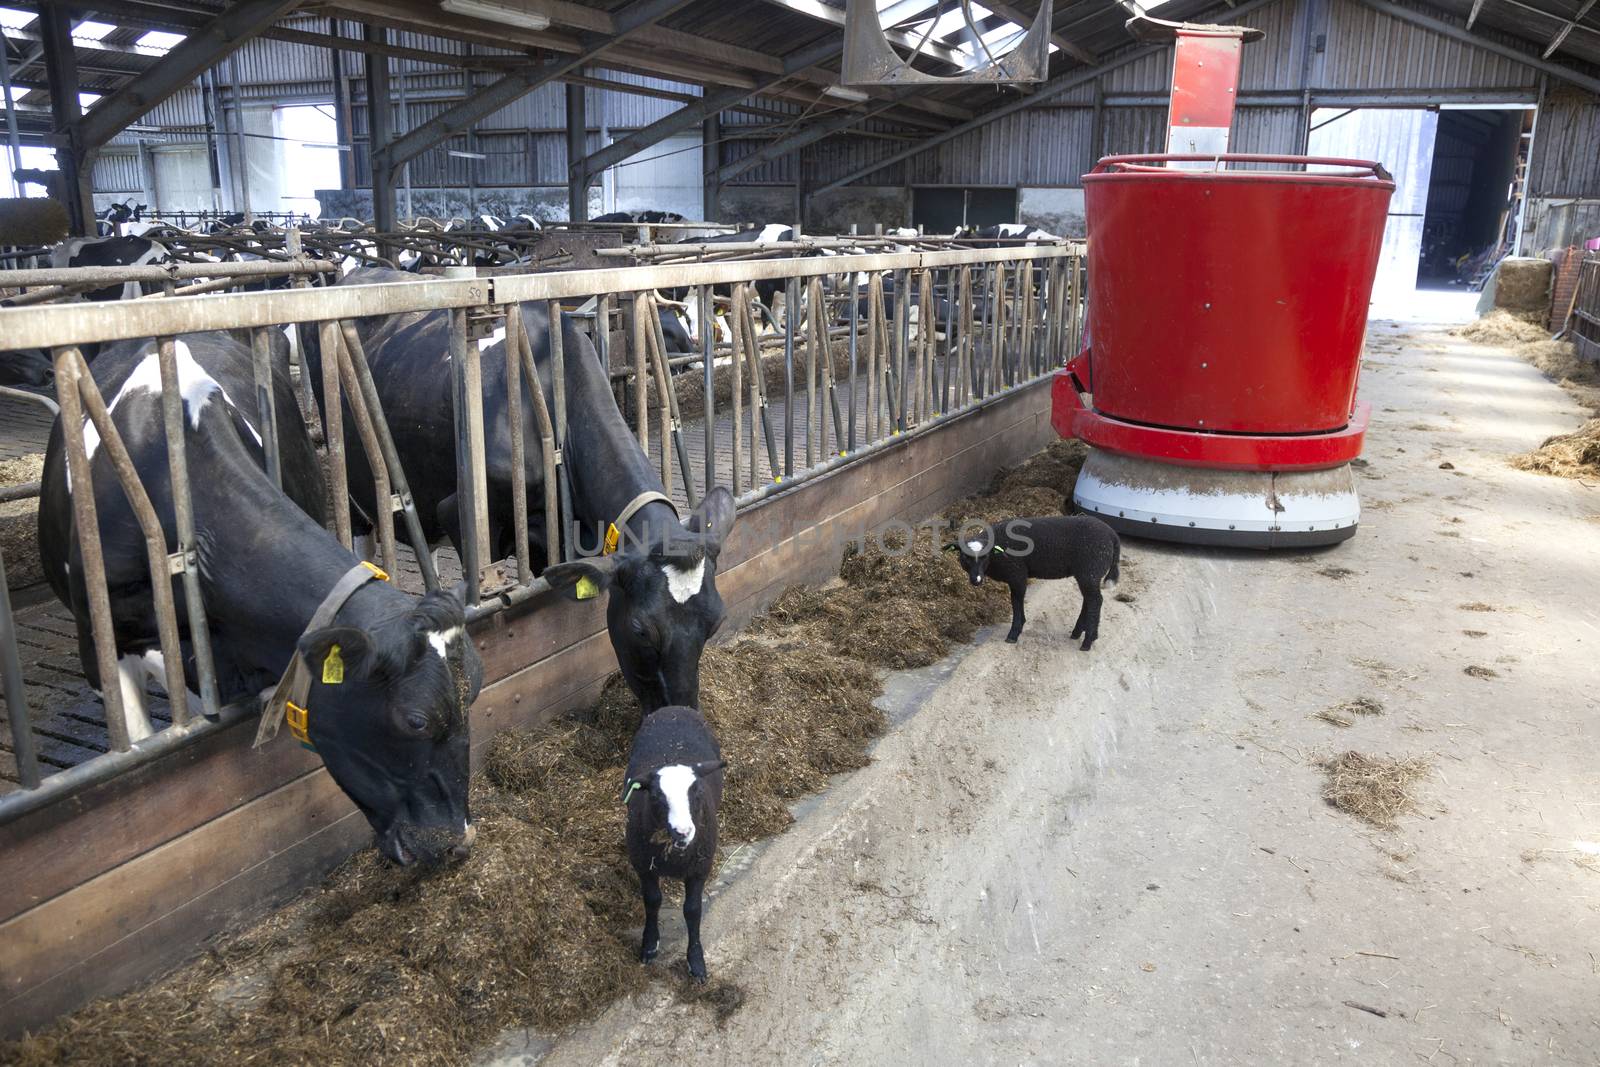 black and white cows in stable feed from feeding robot with lambs watching